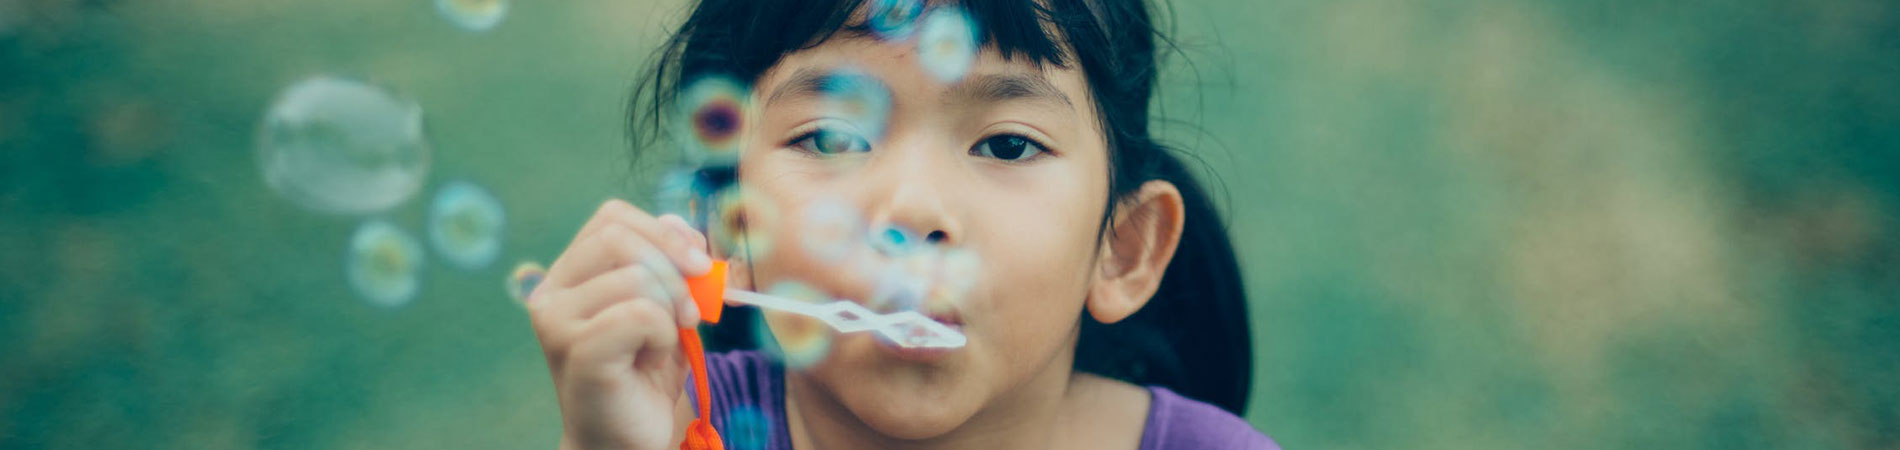 Image of young child blowing bubbles.